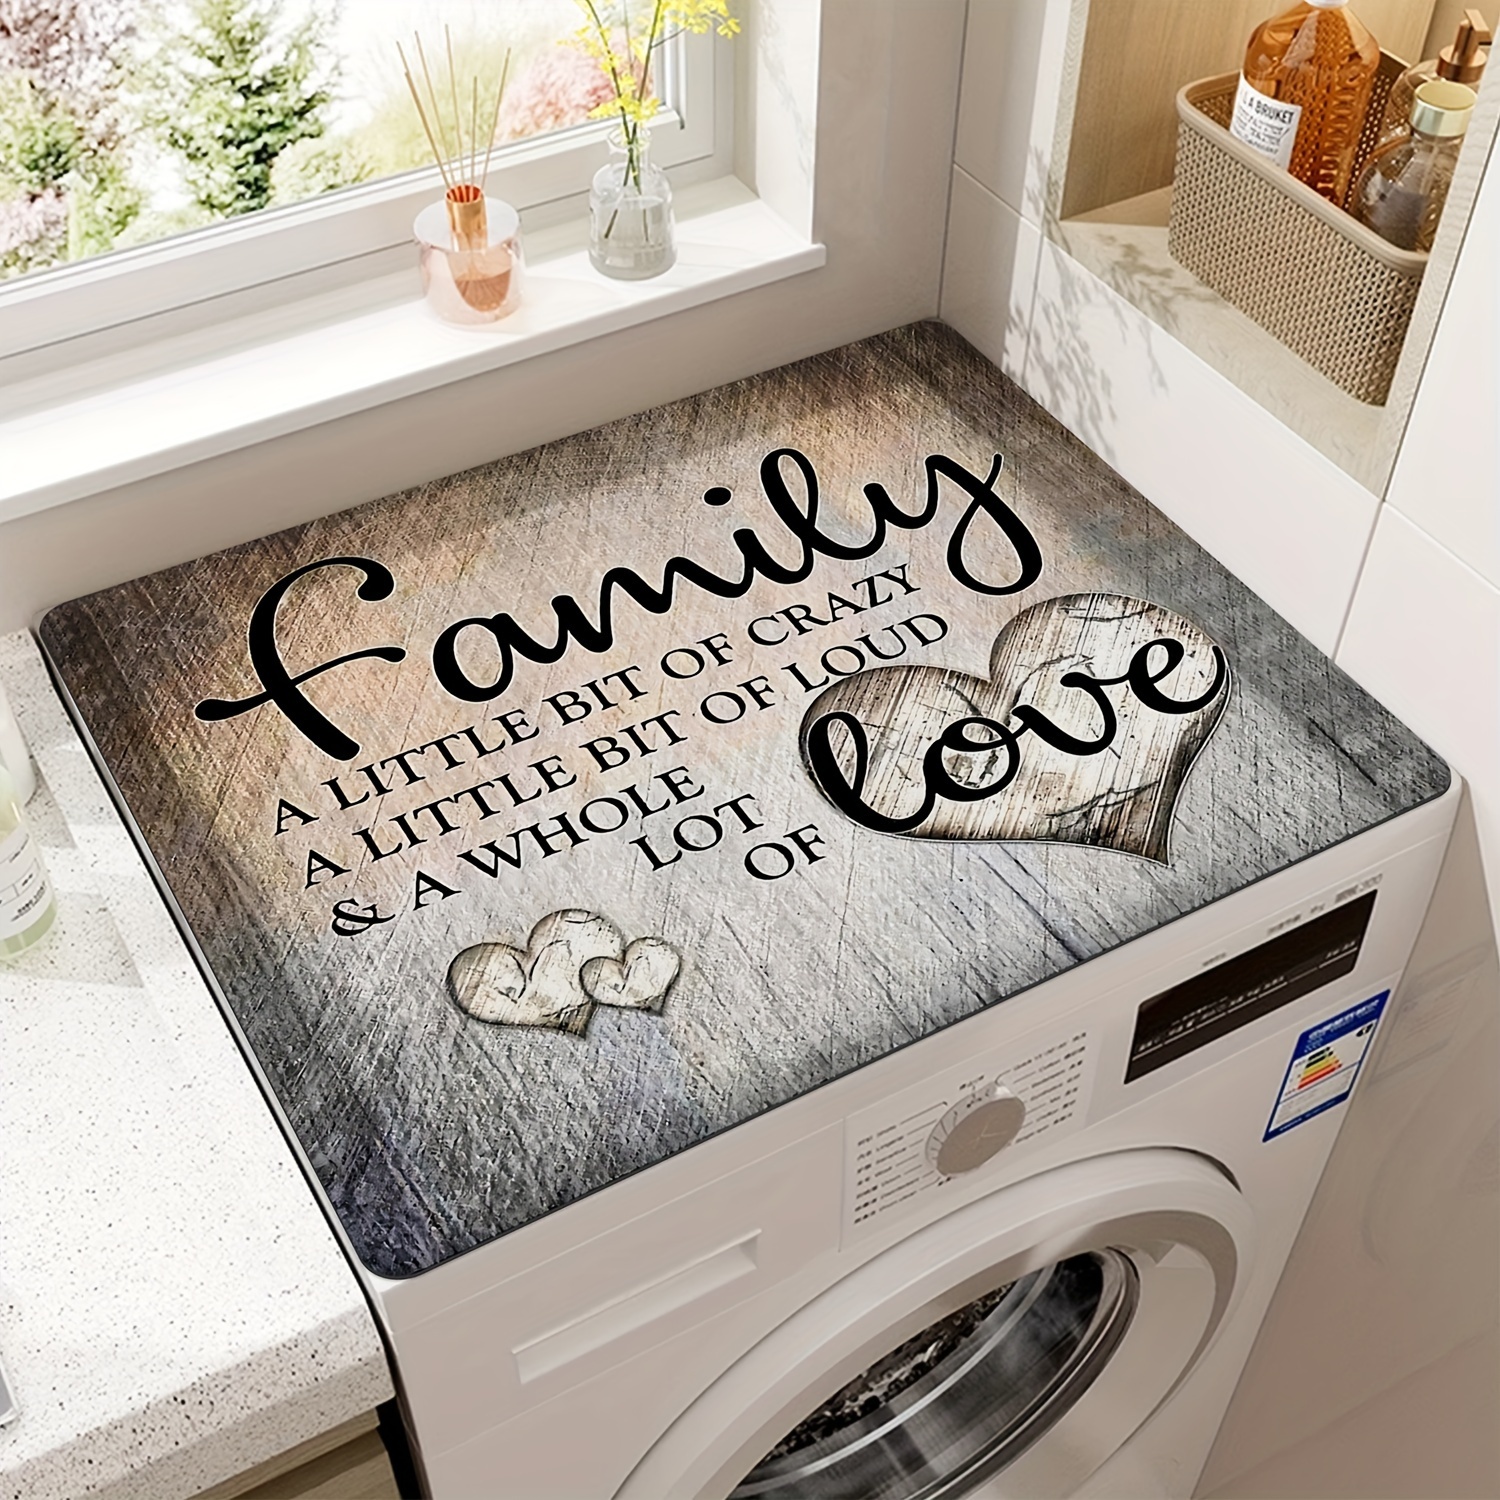 

1pc Letter Printed Washing Machine Dust Cover Pad, Quick-dry Absorbent Protective Top Mat For Washer And Dryer, Modern Utility Pad For Laundry Room And Kitchen Decor